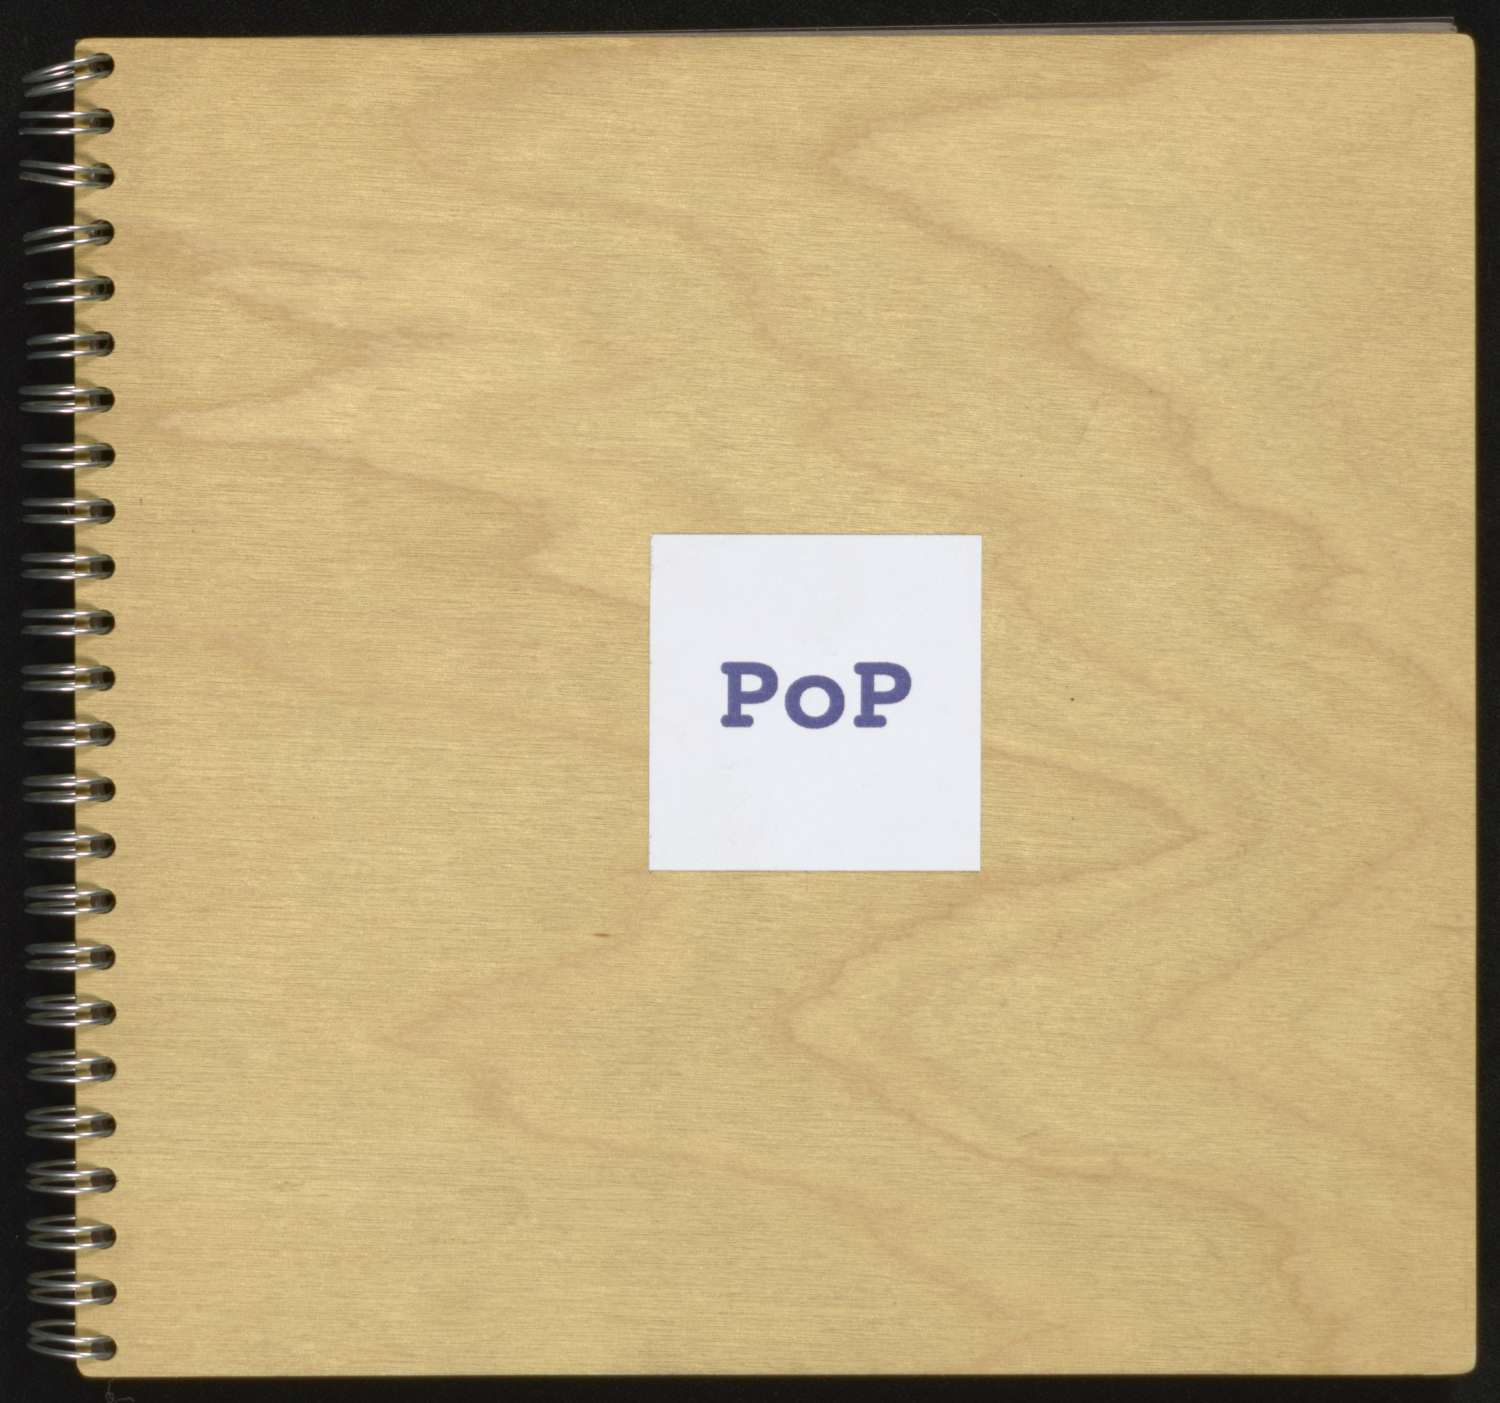 PoP: a restaurant in the east village, nyc